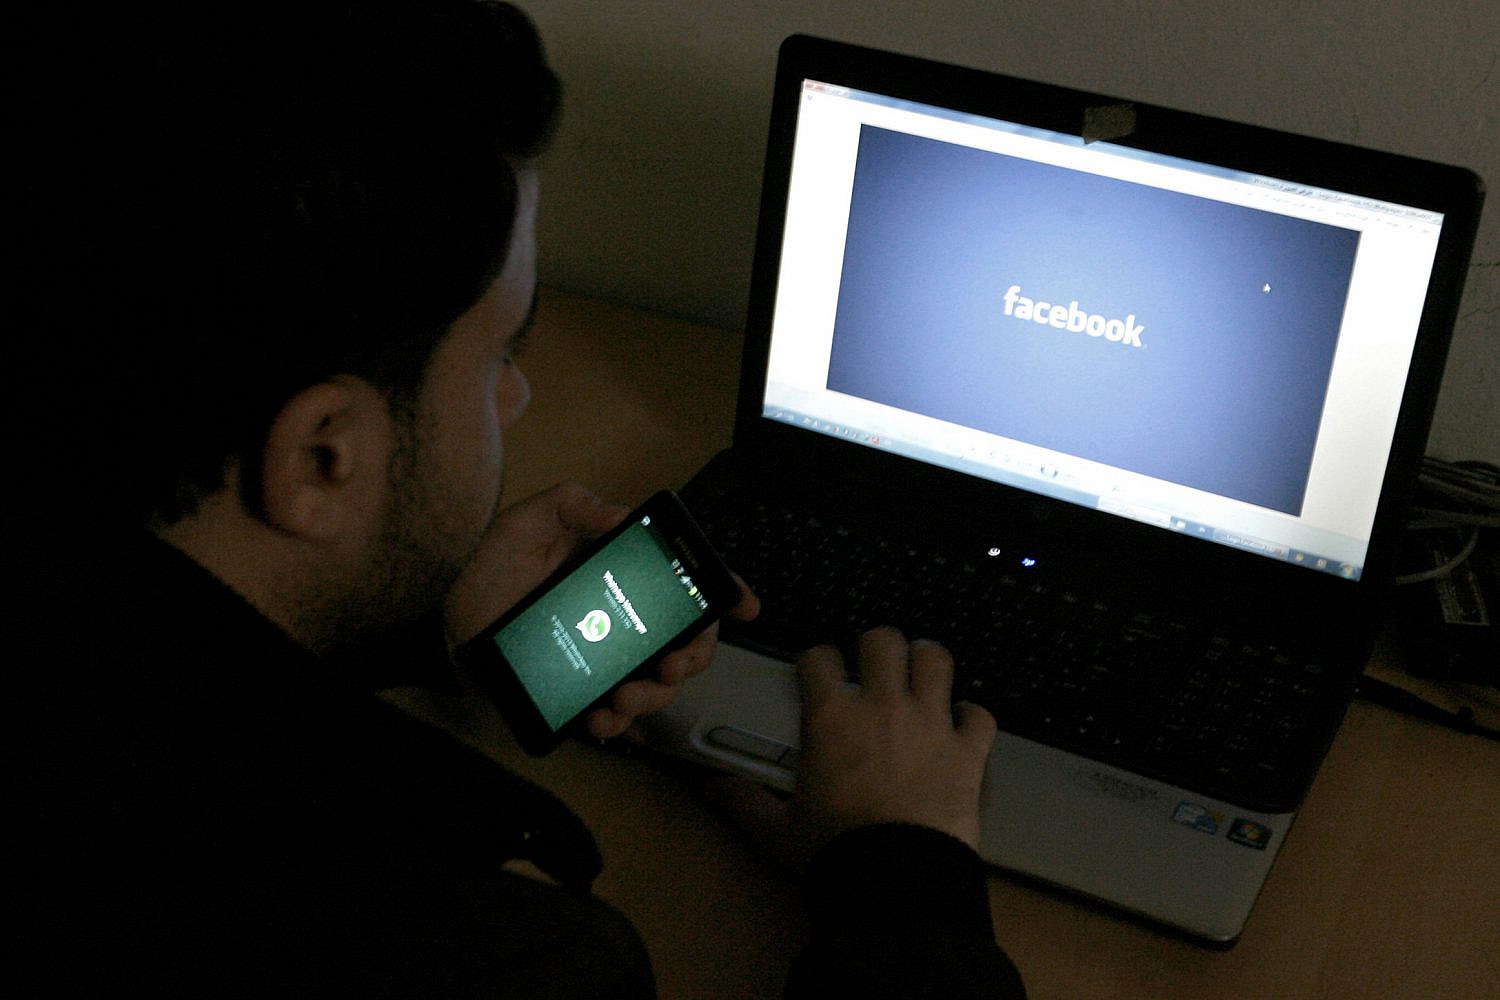 A Palestinian youth holds a phone displaying WhatsApp in front of a computer with Facebook in Rafah in the southern Gaza Strip on February 26, 2014. (Abed Rahim Khatib/Flash90)